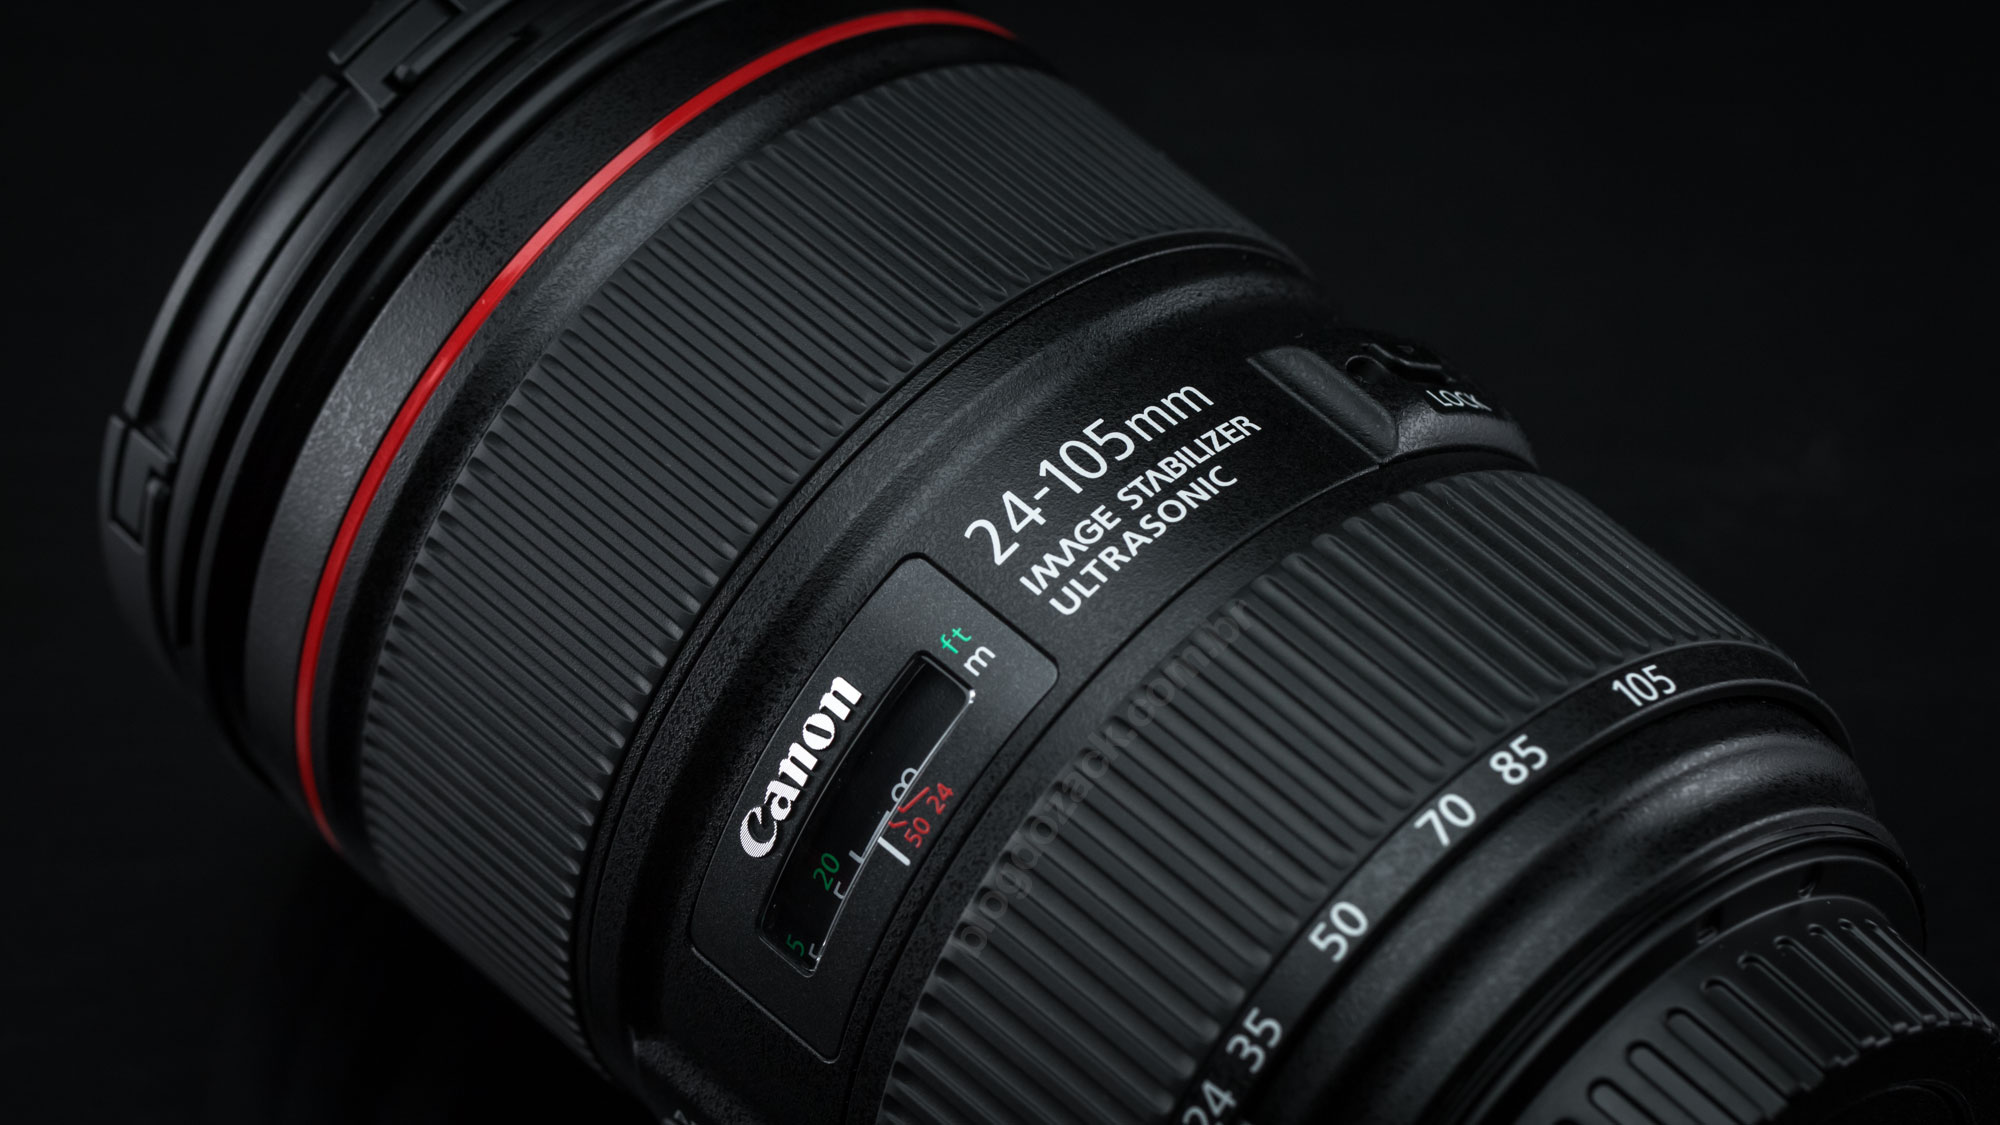 CANON-EF-24-105mm-f4-L-IS-II-USM-02